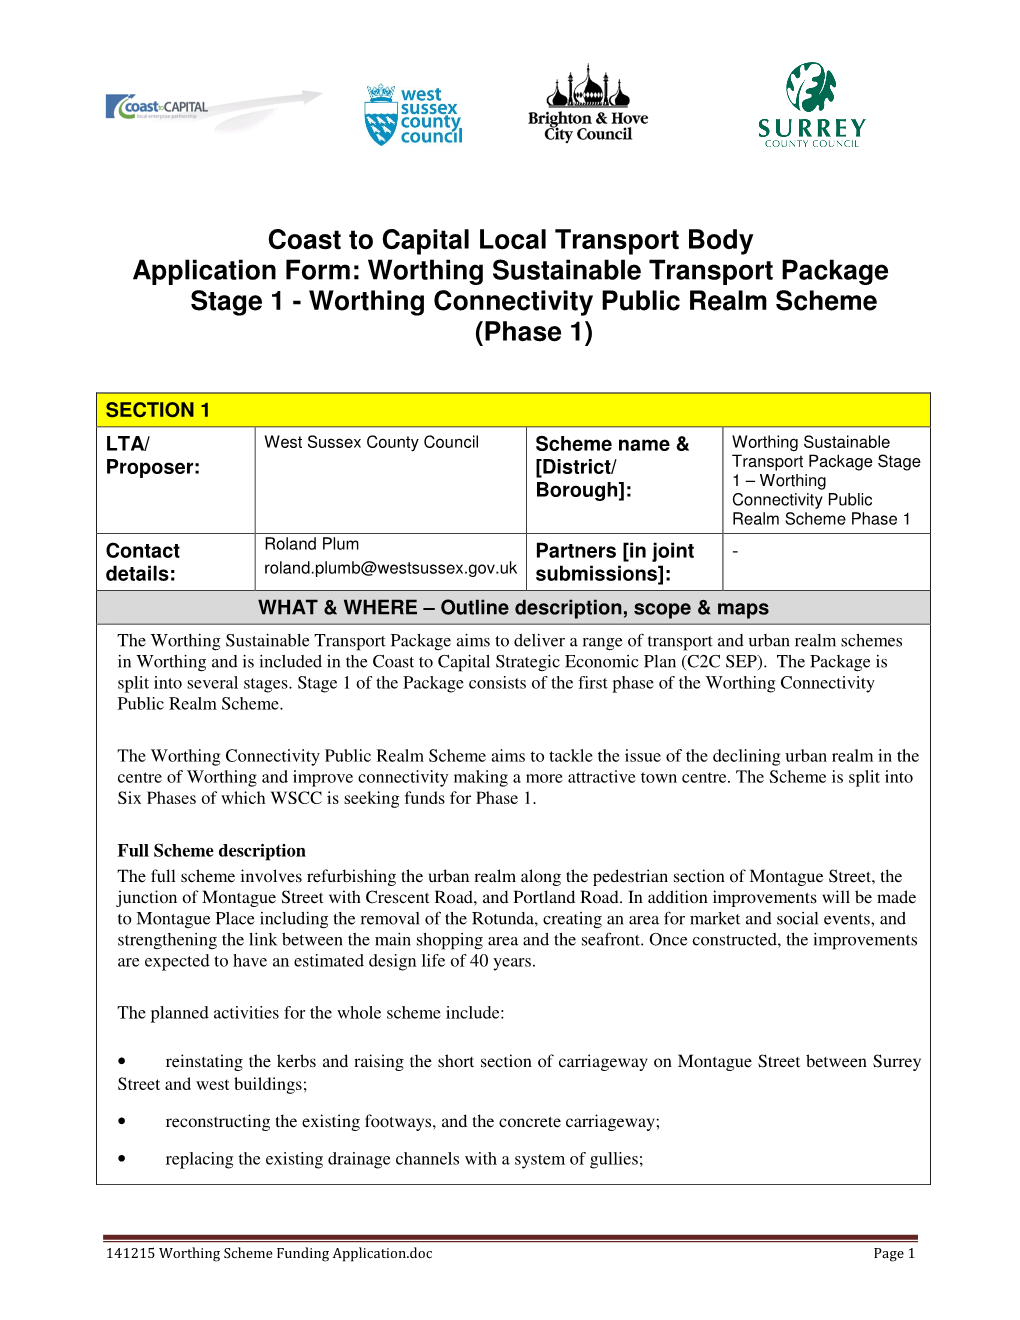 Coast to Capital Local Transport Body Application Form: Worthing Sustainable Transport Package Stage 1 - Worthing Connectivity Public Realm Scheme (Phase 1)